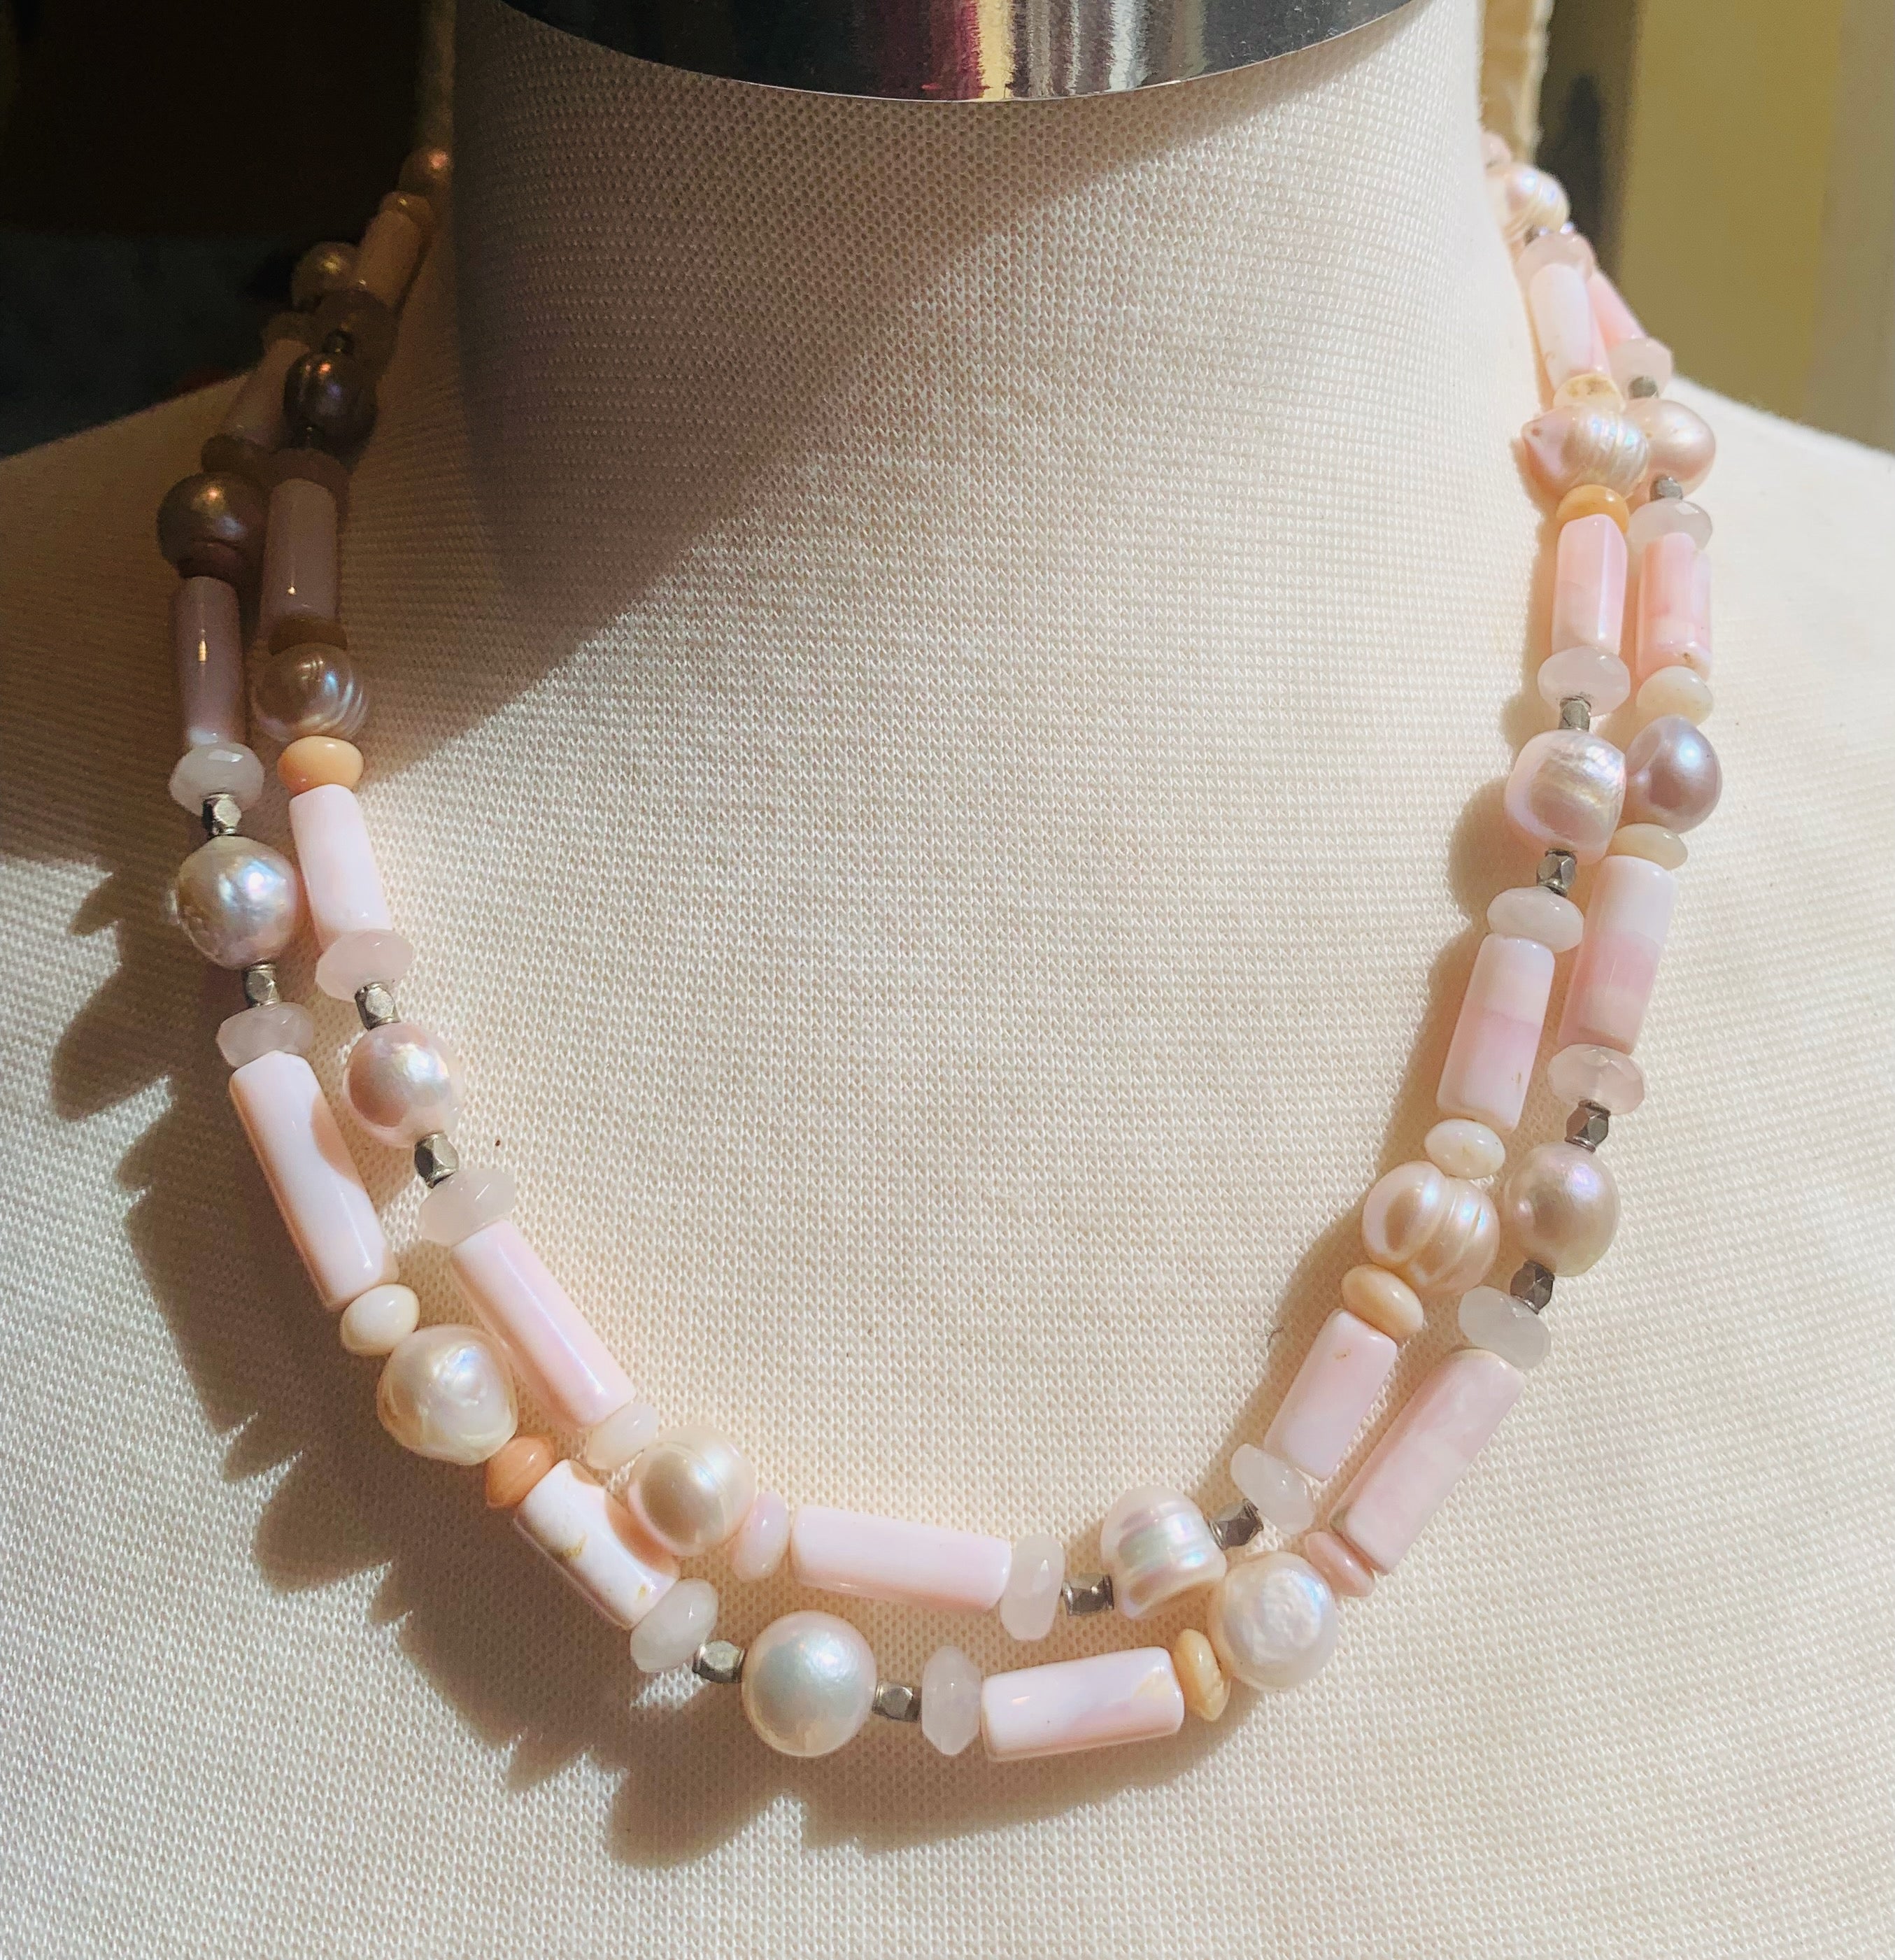  42" Long Peruvian Pink Opal, Rose Quartz, Baroque Pearl, and Sterling Necklace